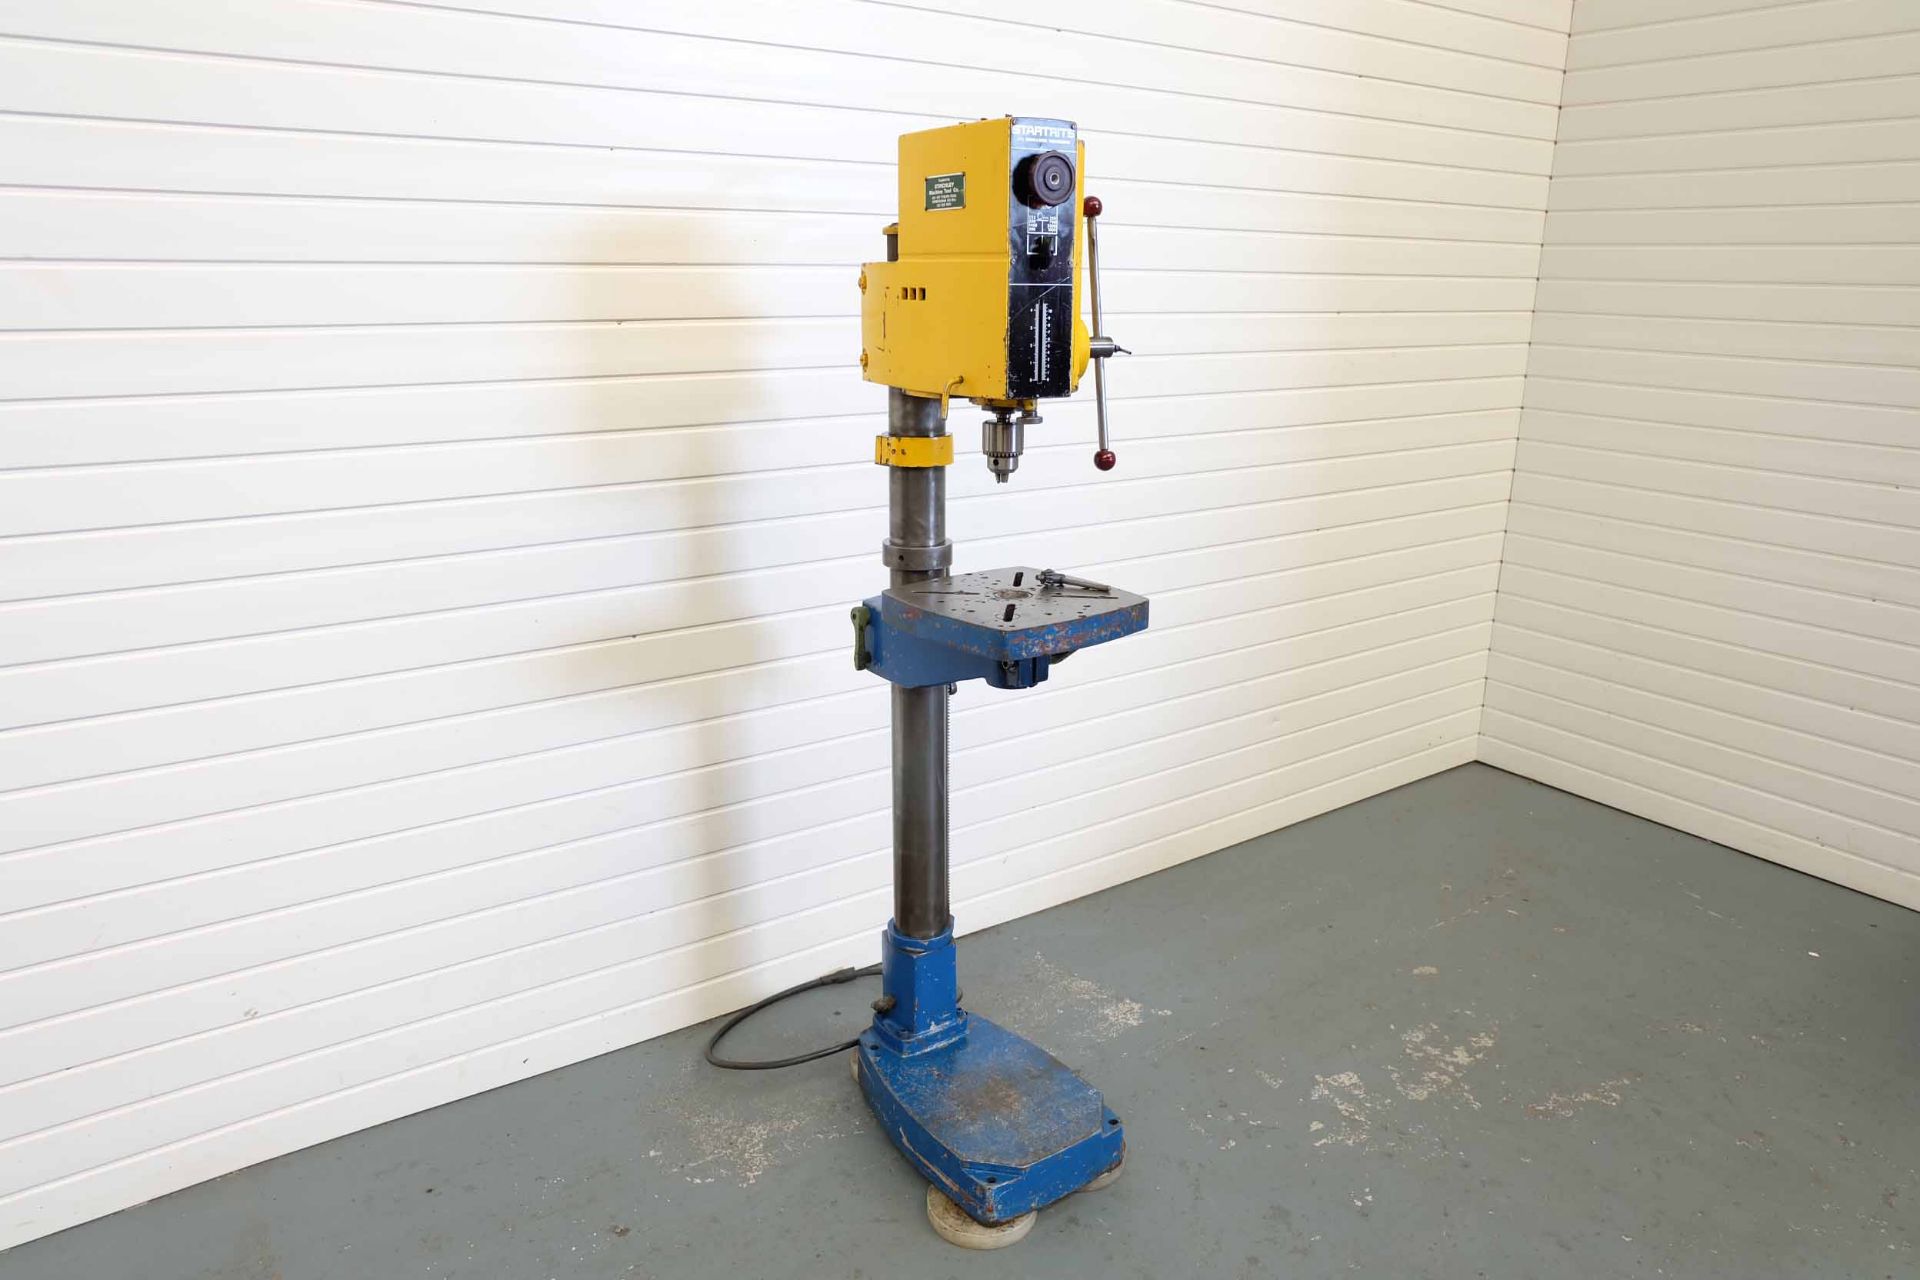 Startrite EFI Pillar Drill. Spindle Taper No.3 Morse. Spindle Speeds 125 - 2800rpm. Drilling Chuck C